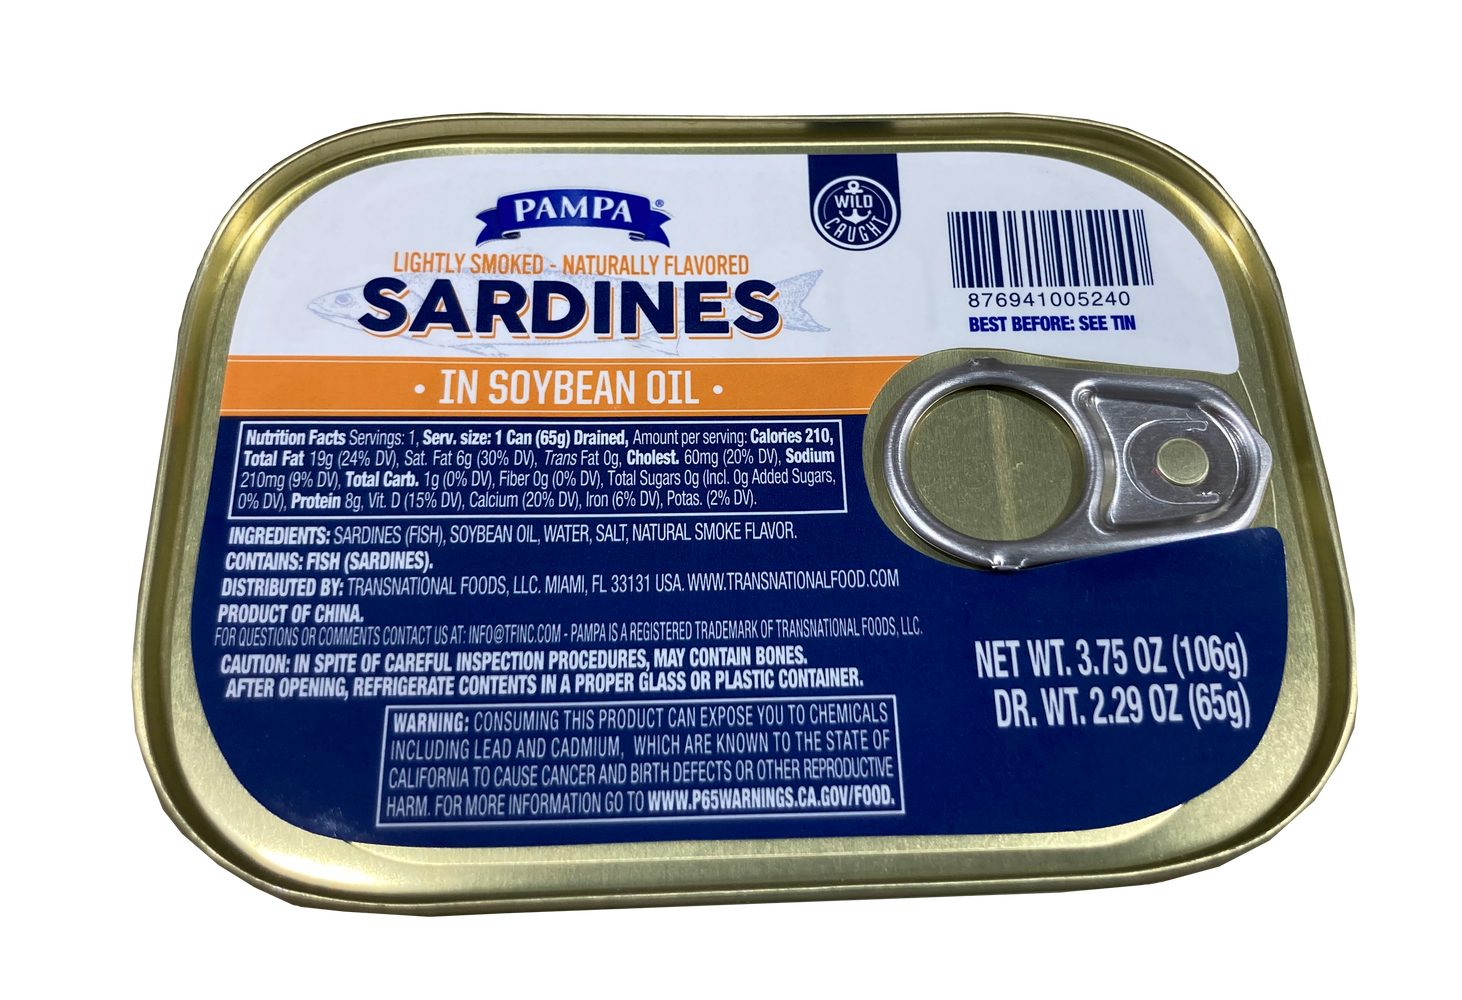 Pampa Sardines in Oil, Lightly Smoked, 3.75 oz